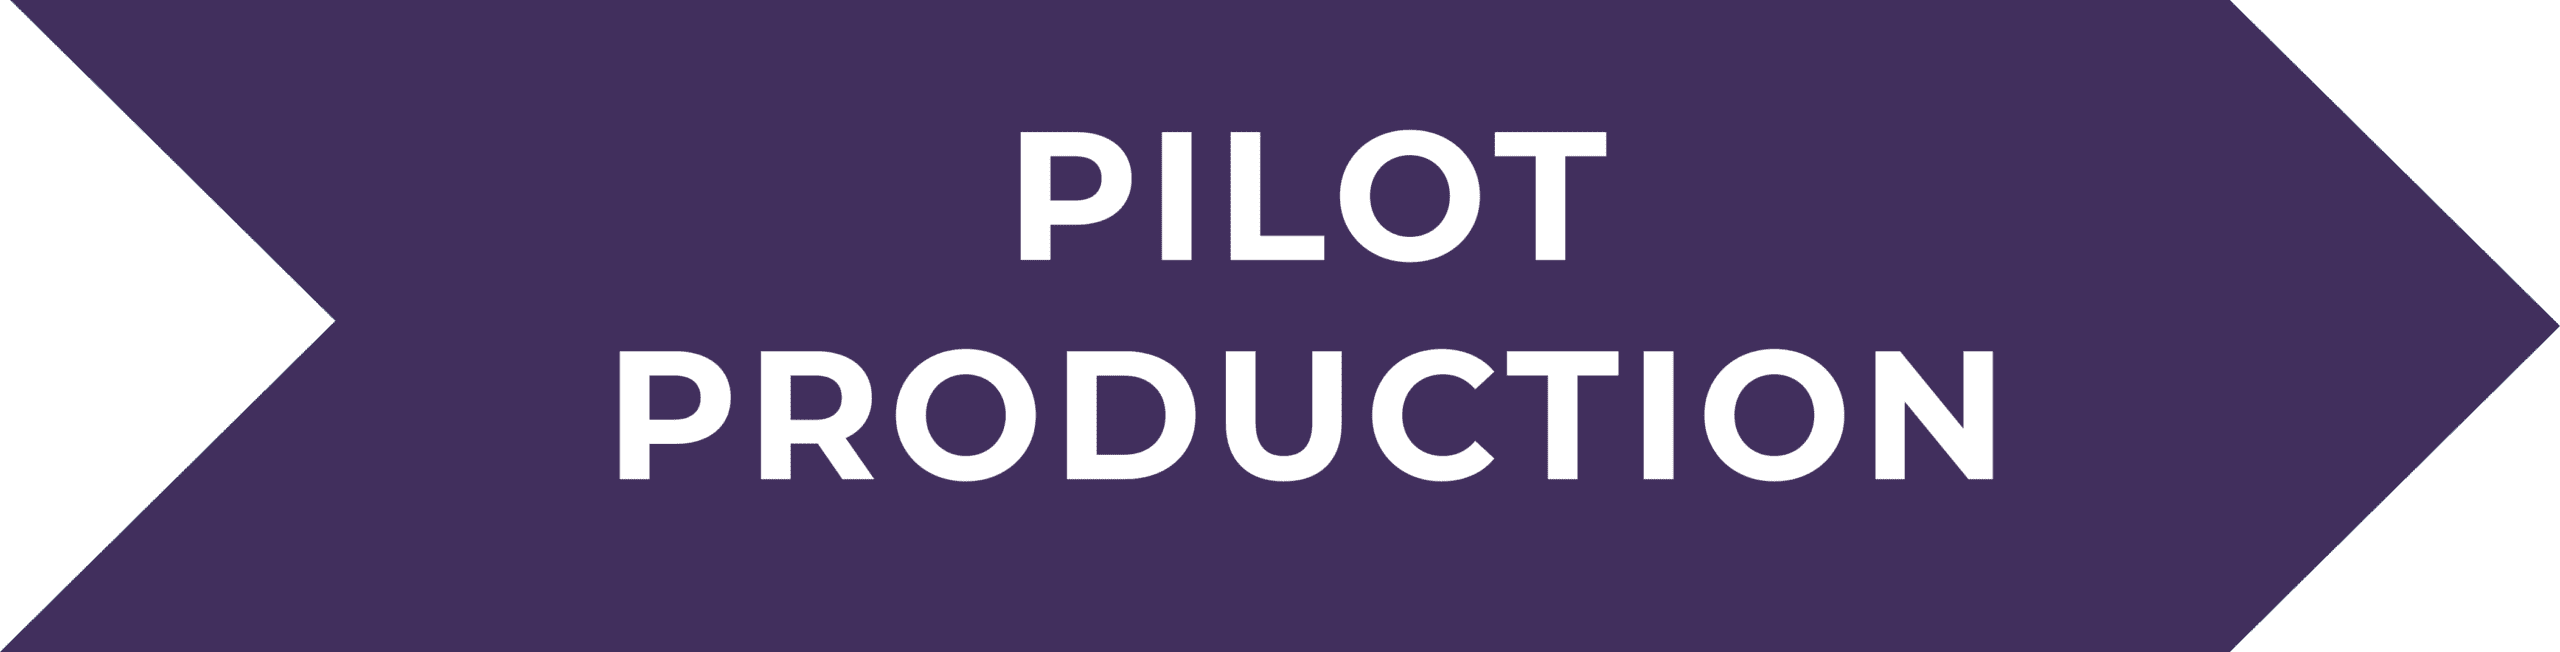 Graphic with text "Pilot Production"